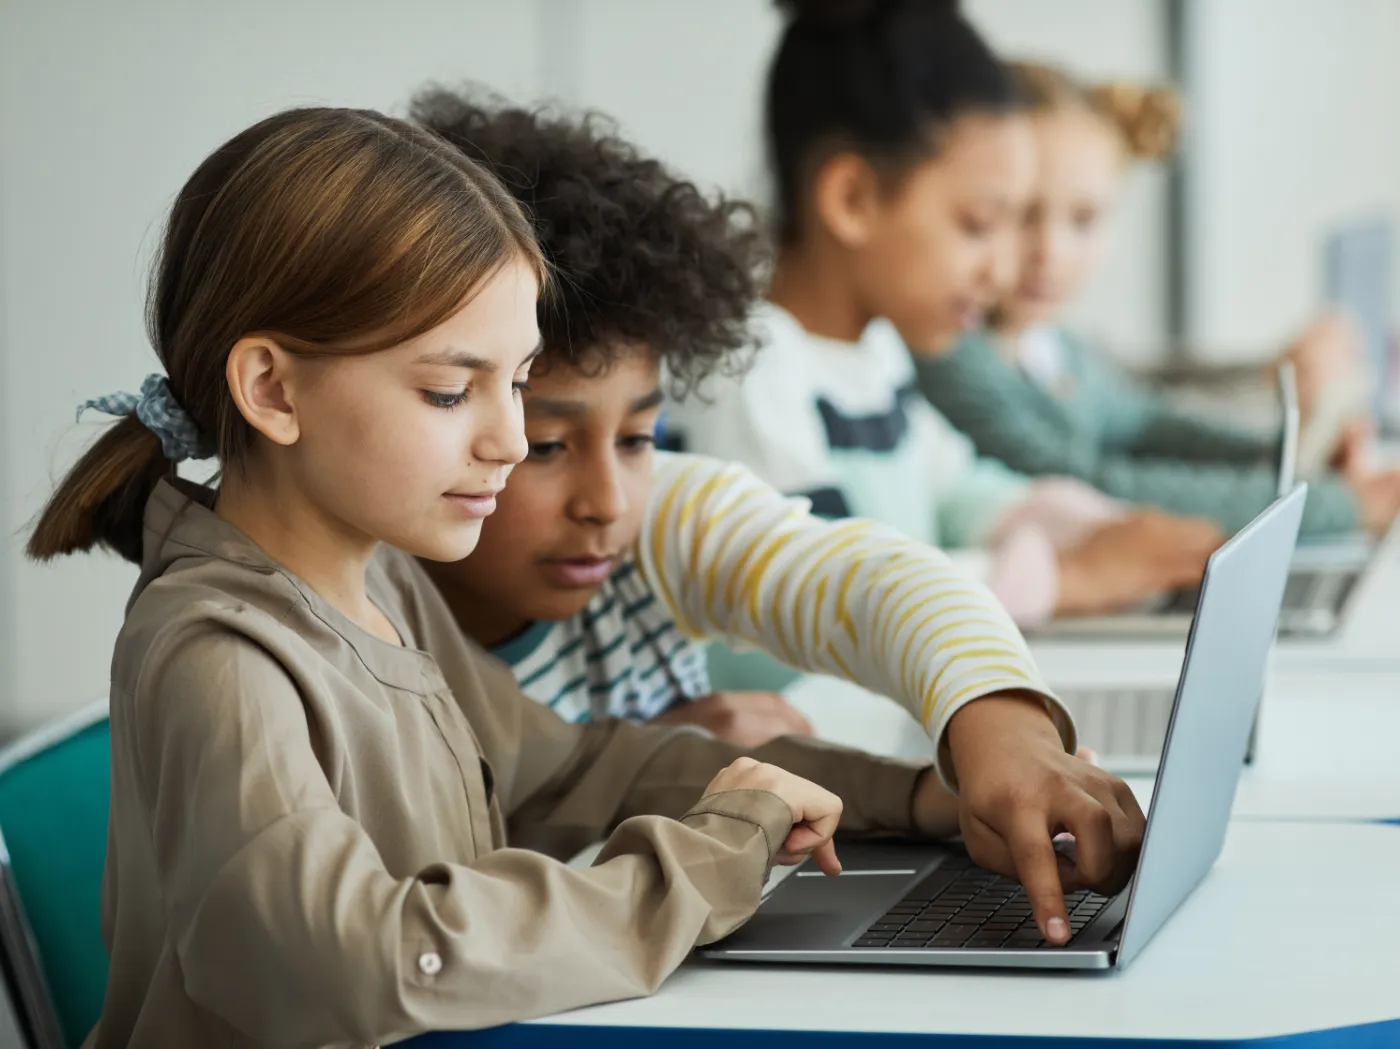 Children work together on a laptop computer in a classroom